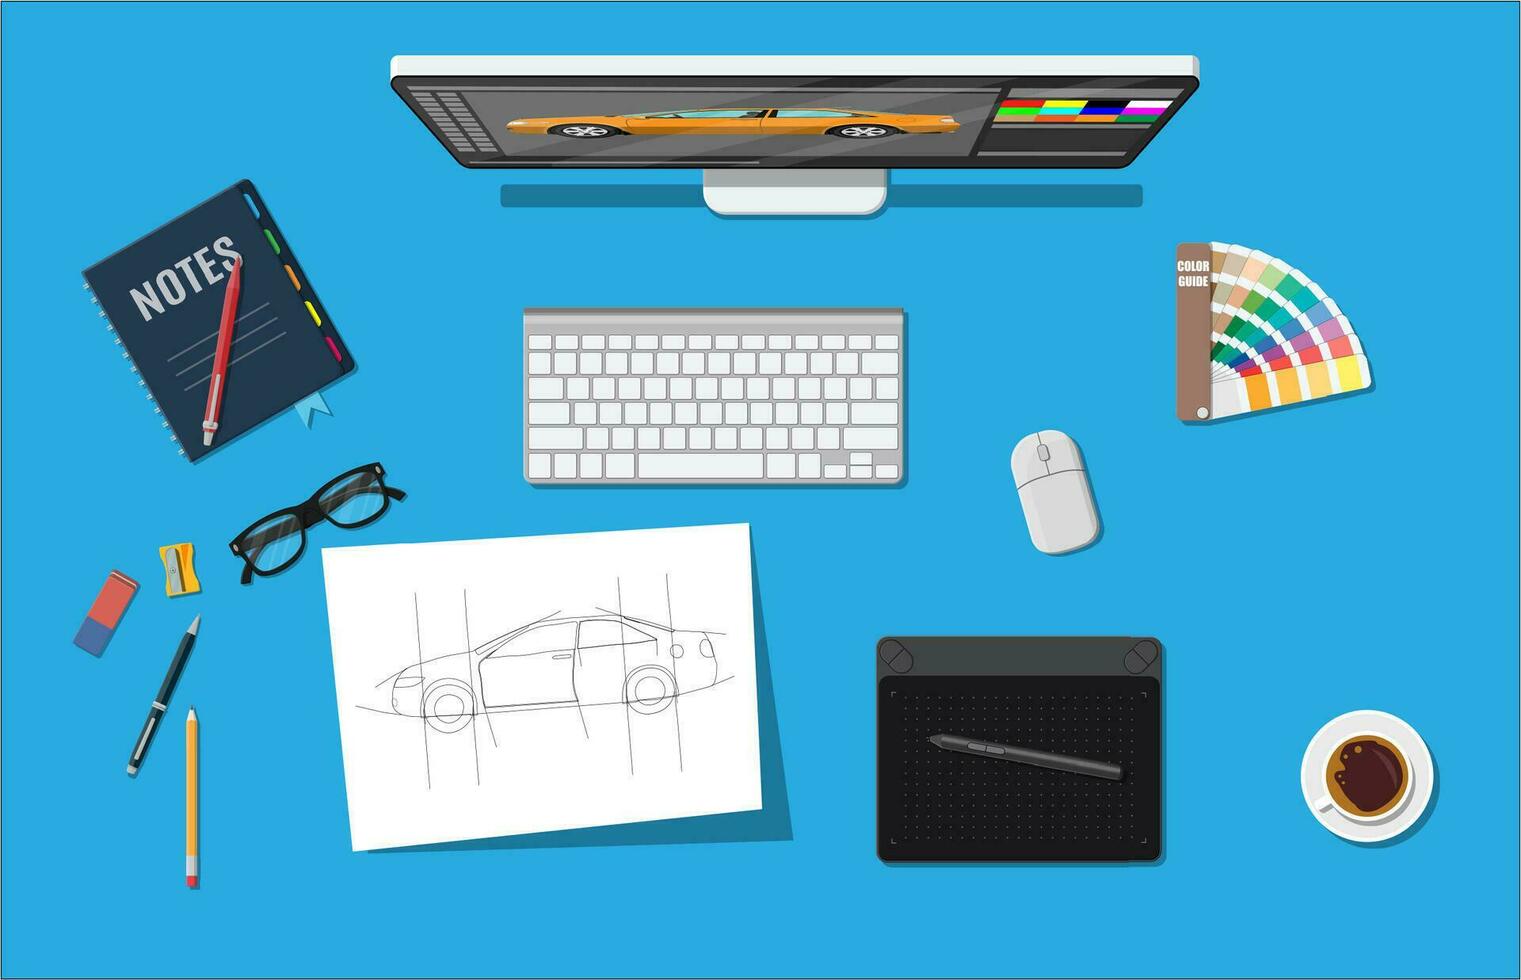 Designer workplace. Illustrator desktop with tools. Desktop pc, keyboard, mouse, glasses, notes, pen, coffee. Sketch on paper blank and graphic tablet. Vector illustration in flat style